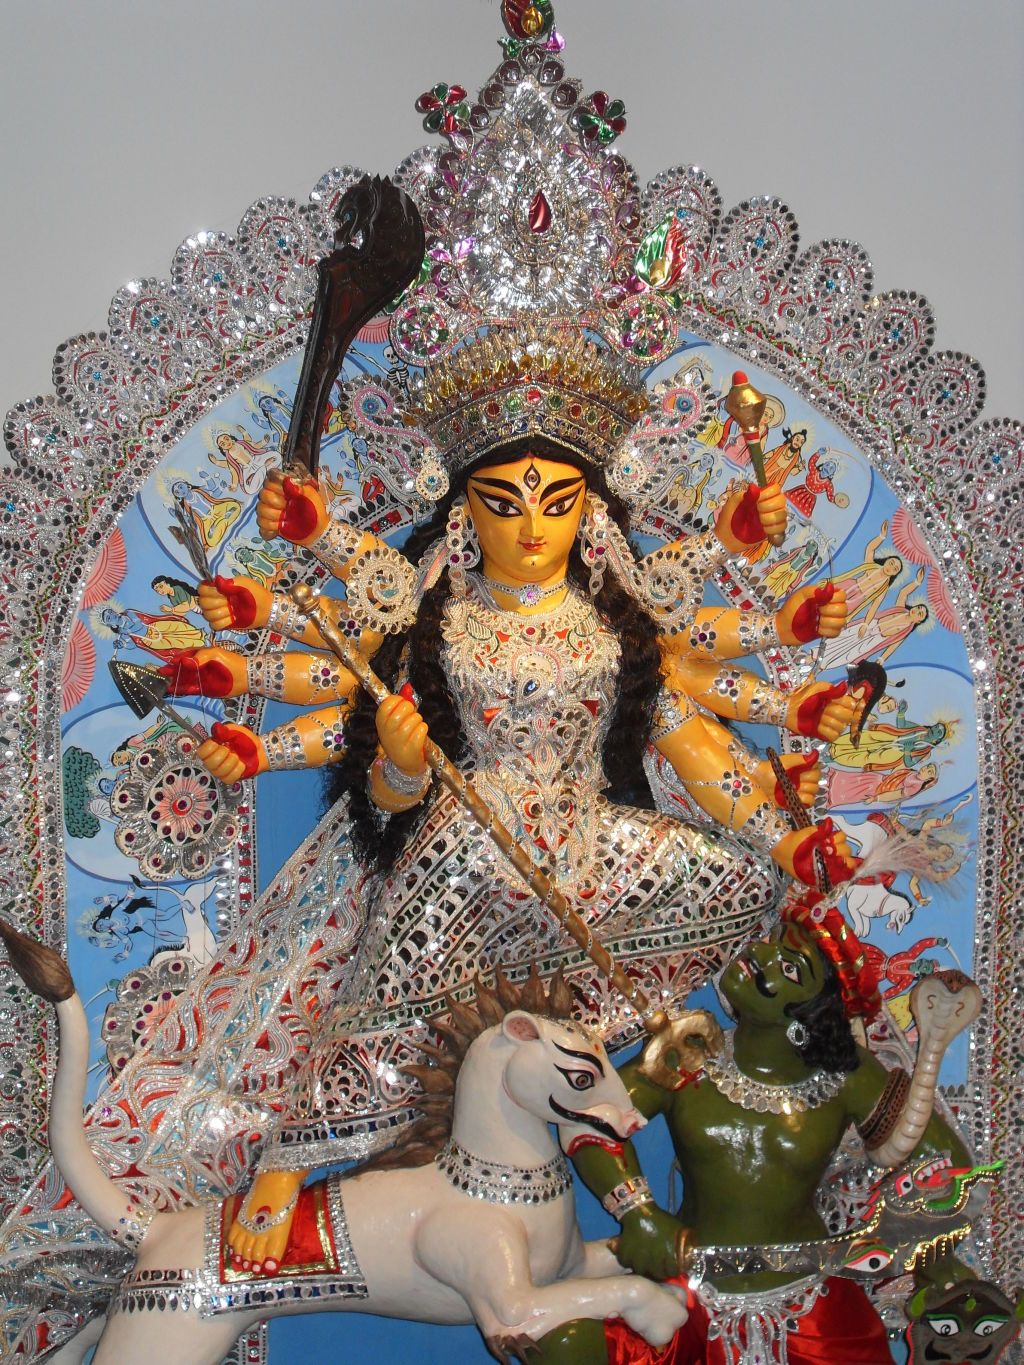 The Goddess Durga ready for the Puja